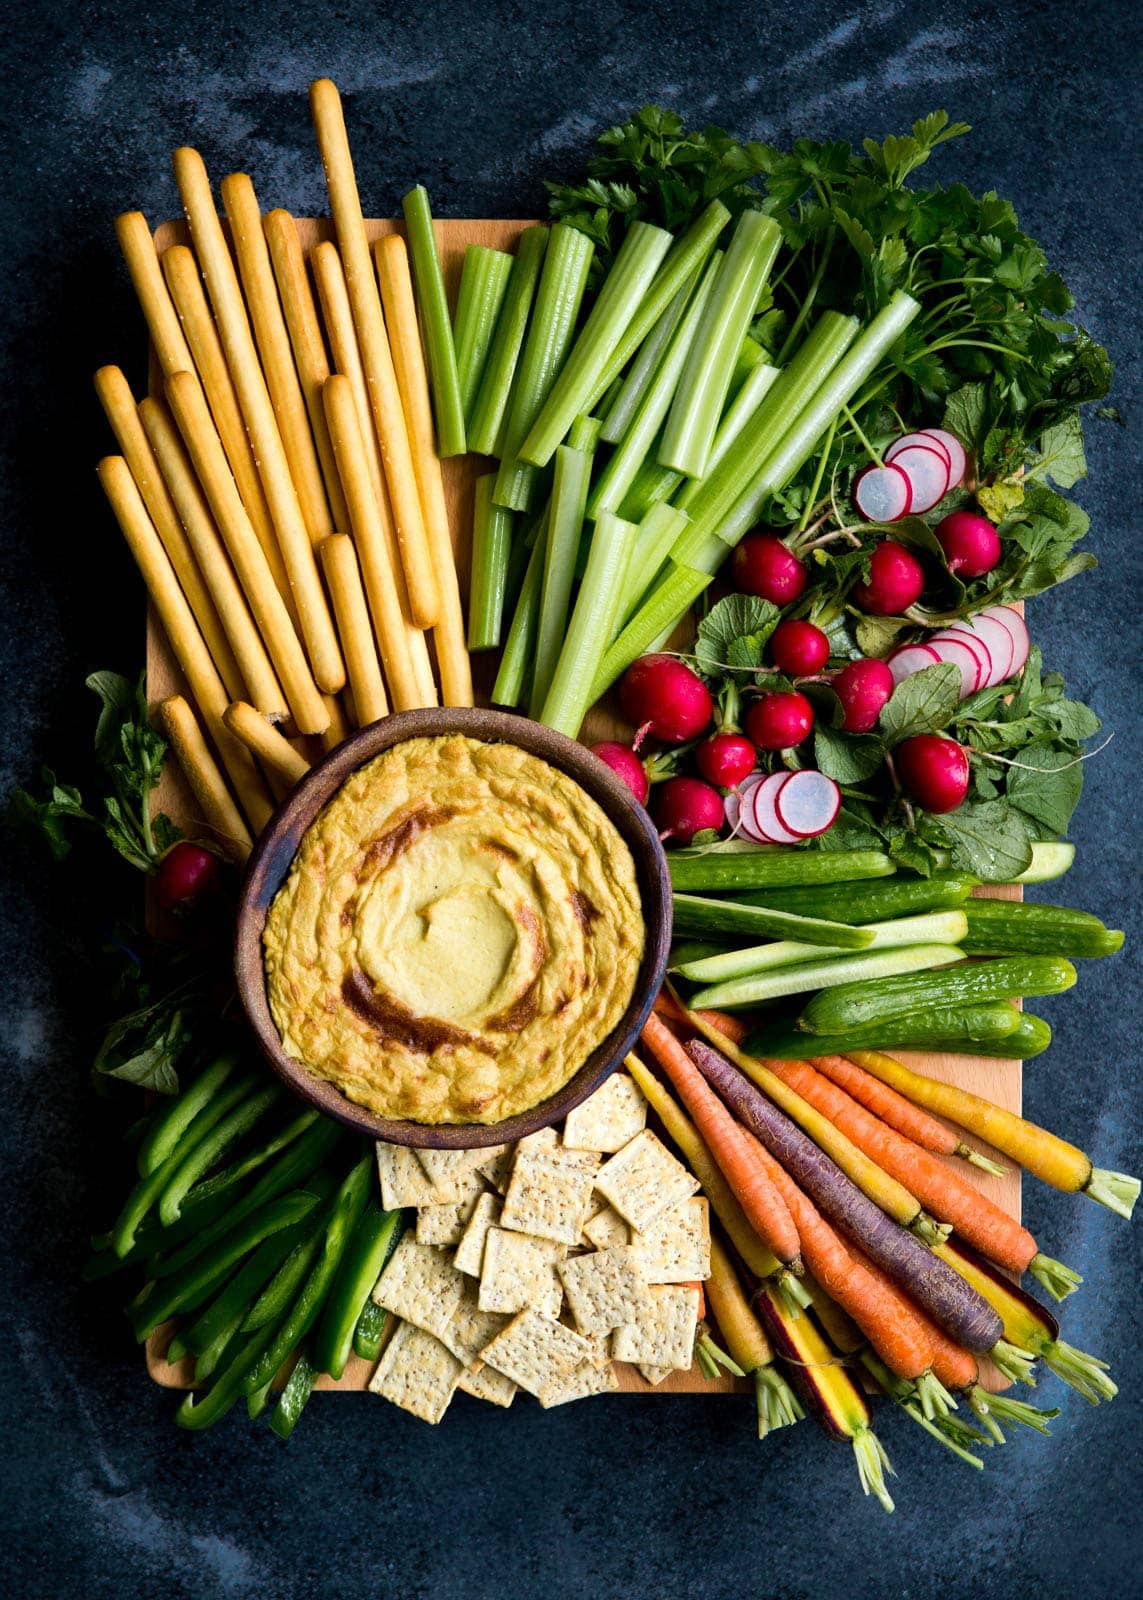 Mom's creamy, cheesy Artichoke Dip with a bountiful crudités is perfect for a crowd.